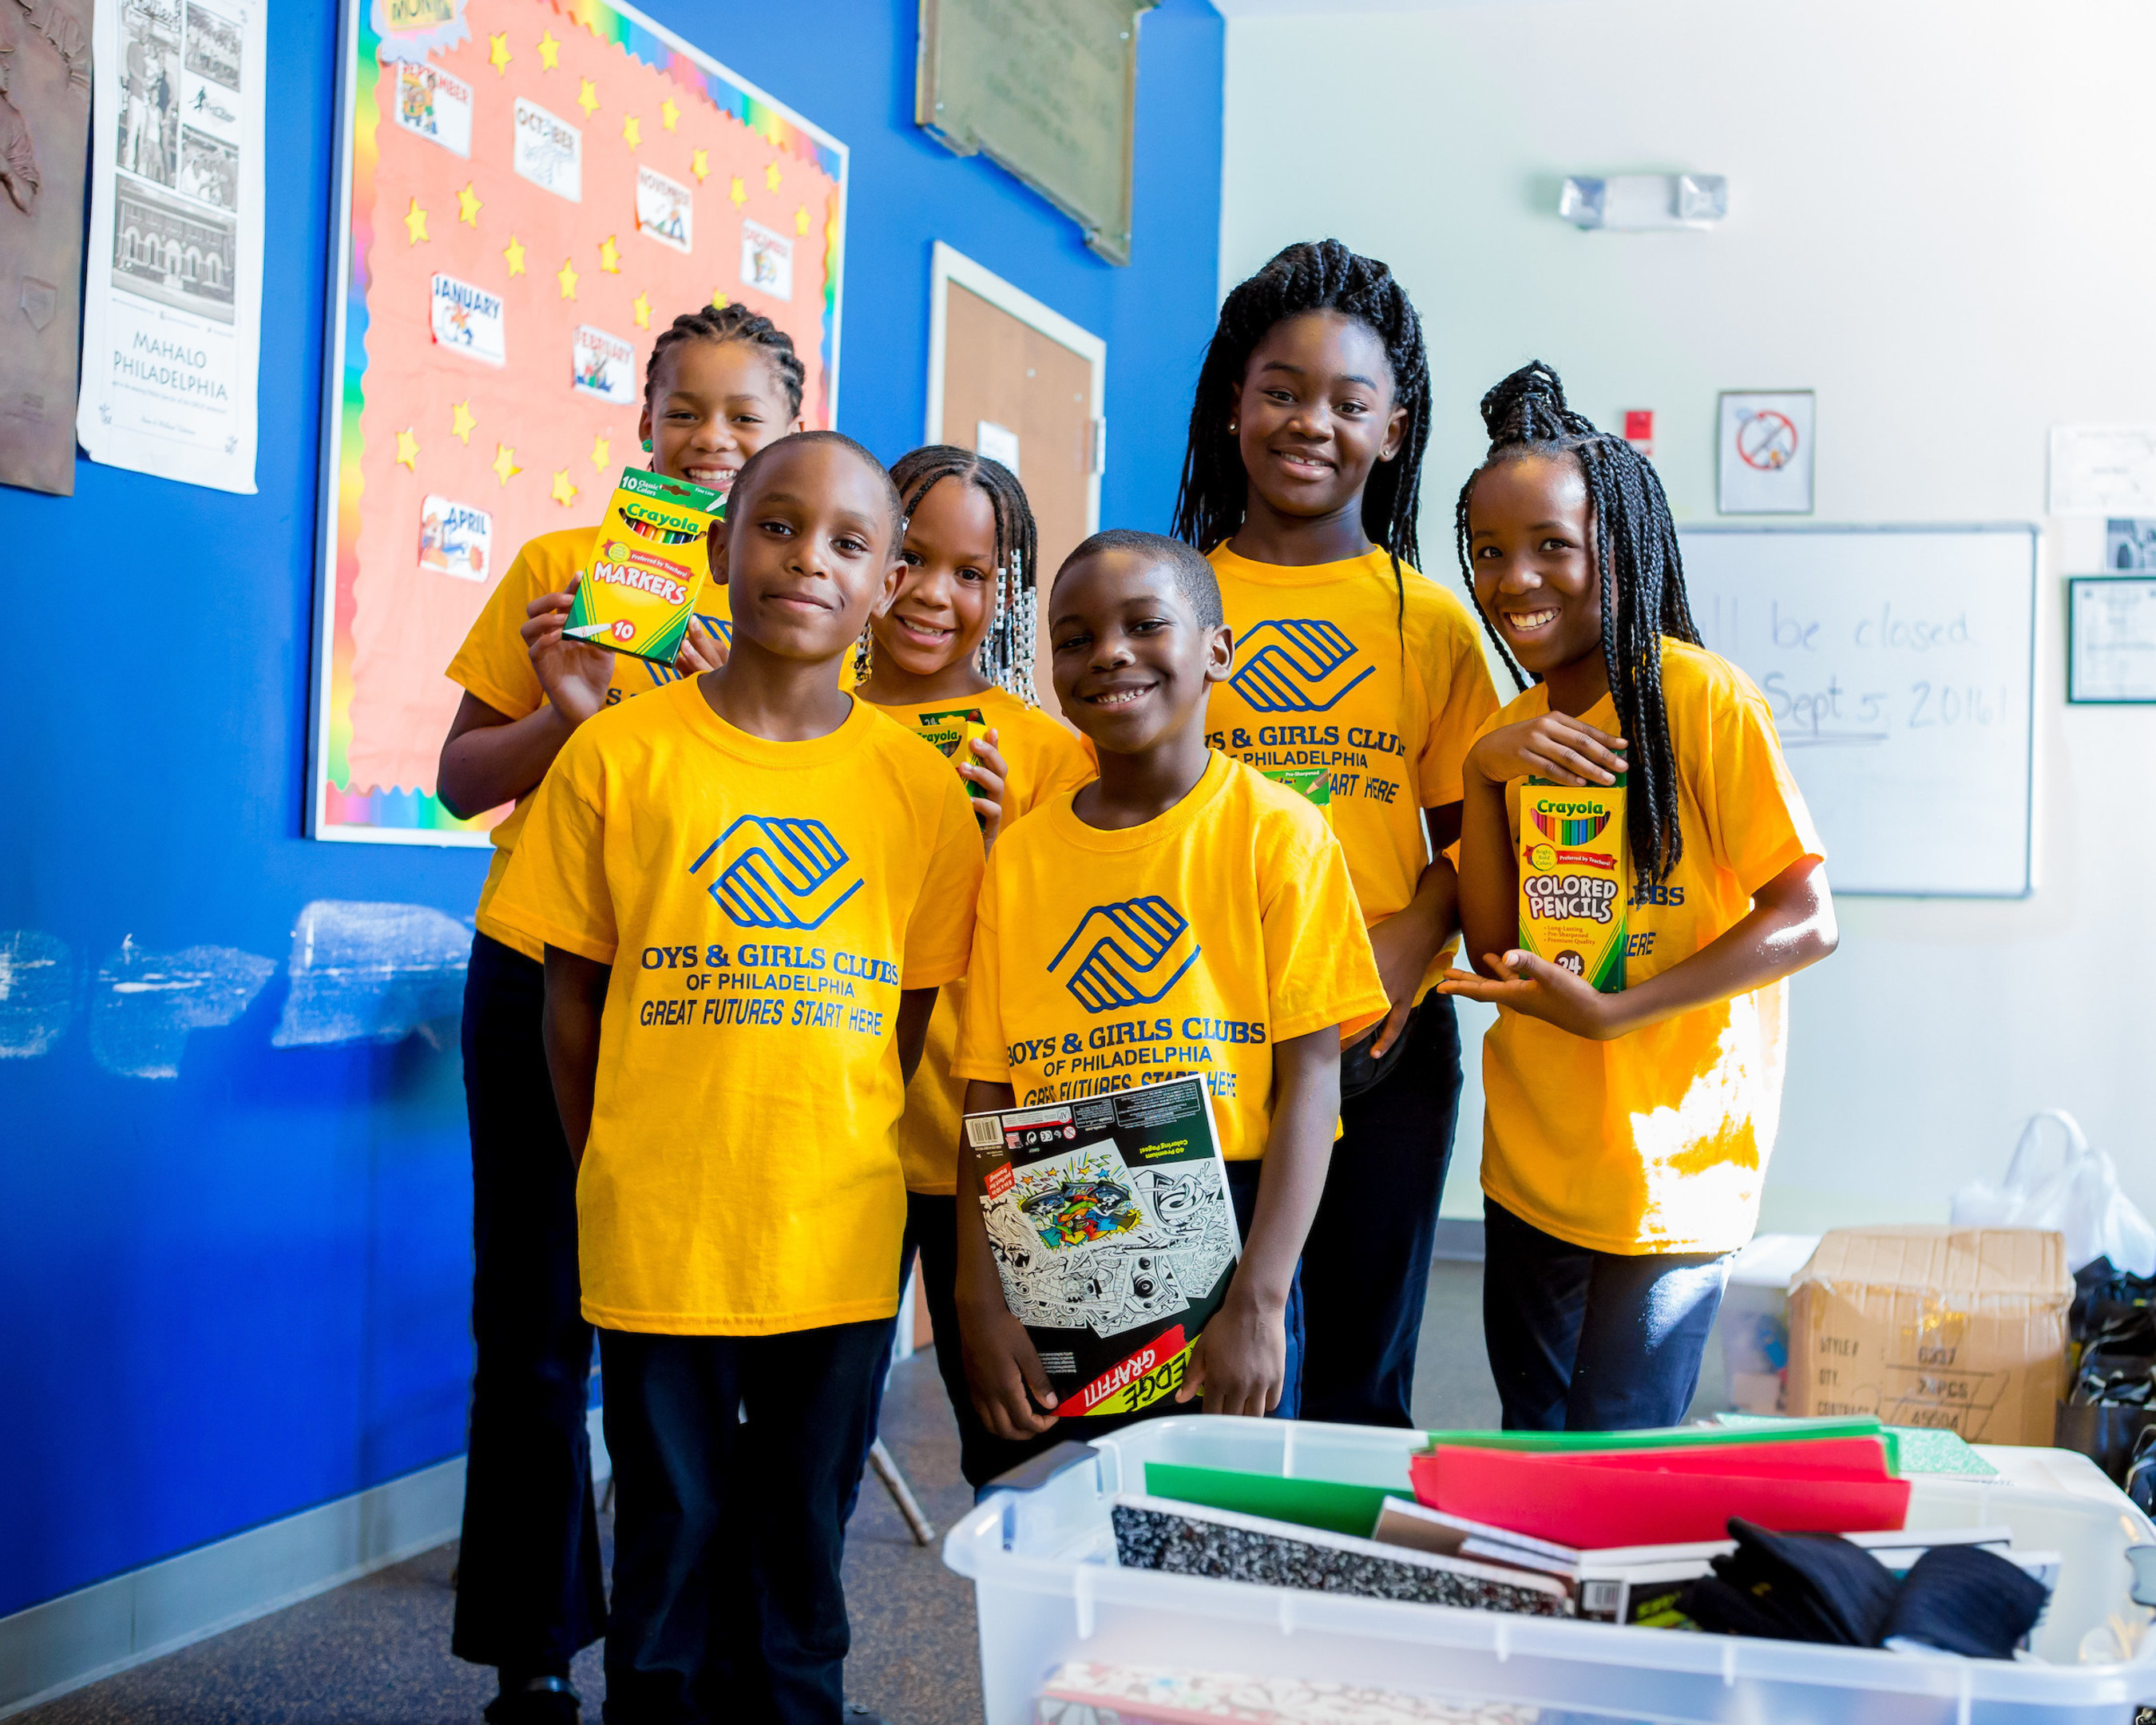 Youth from Boys & Girls Clubs in Philadelphia receive back to school supplies, thanks to Boys & Girls Clubs of America's Back2School Stuff the Bus campaign.